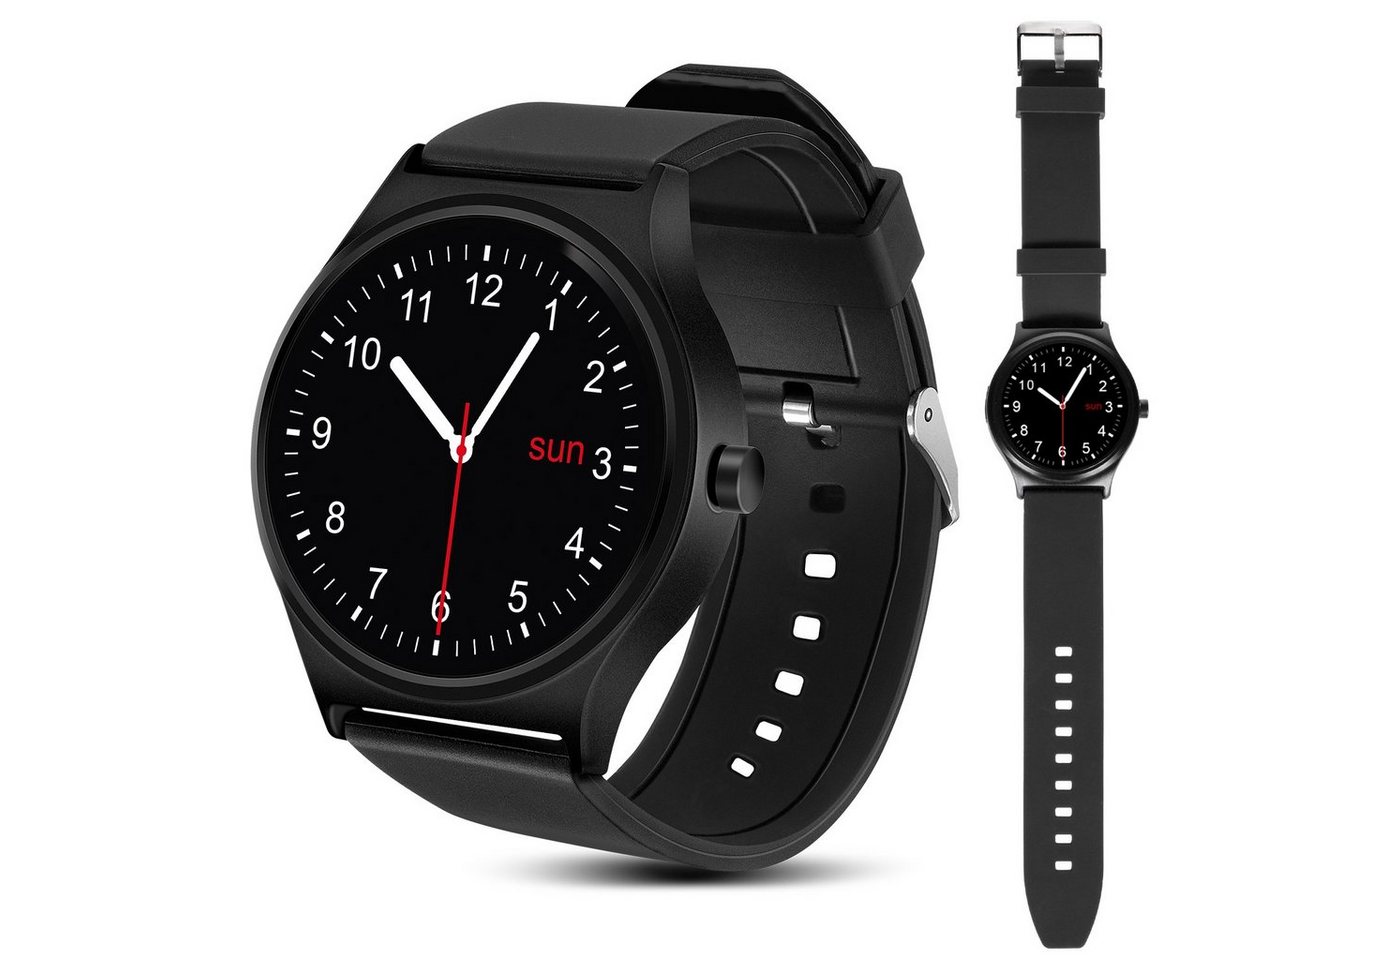 NanoRS RS100 Smartwatch (1,3 Zoll), Touchscreen, Bluetooth 4.0, Anrufe/SMS/Social Media von NanoRS